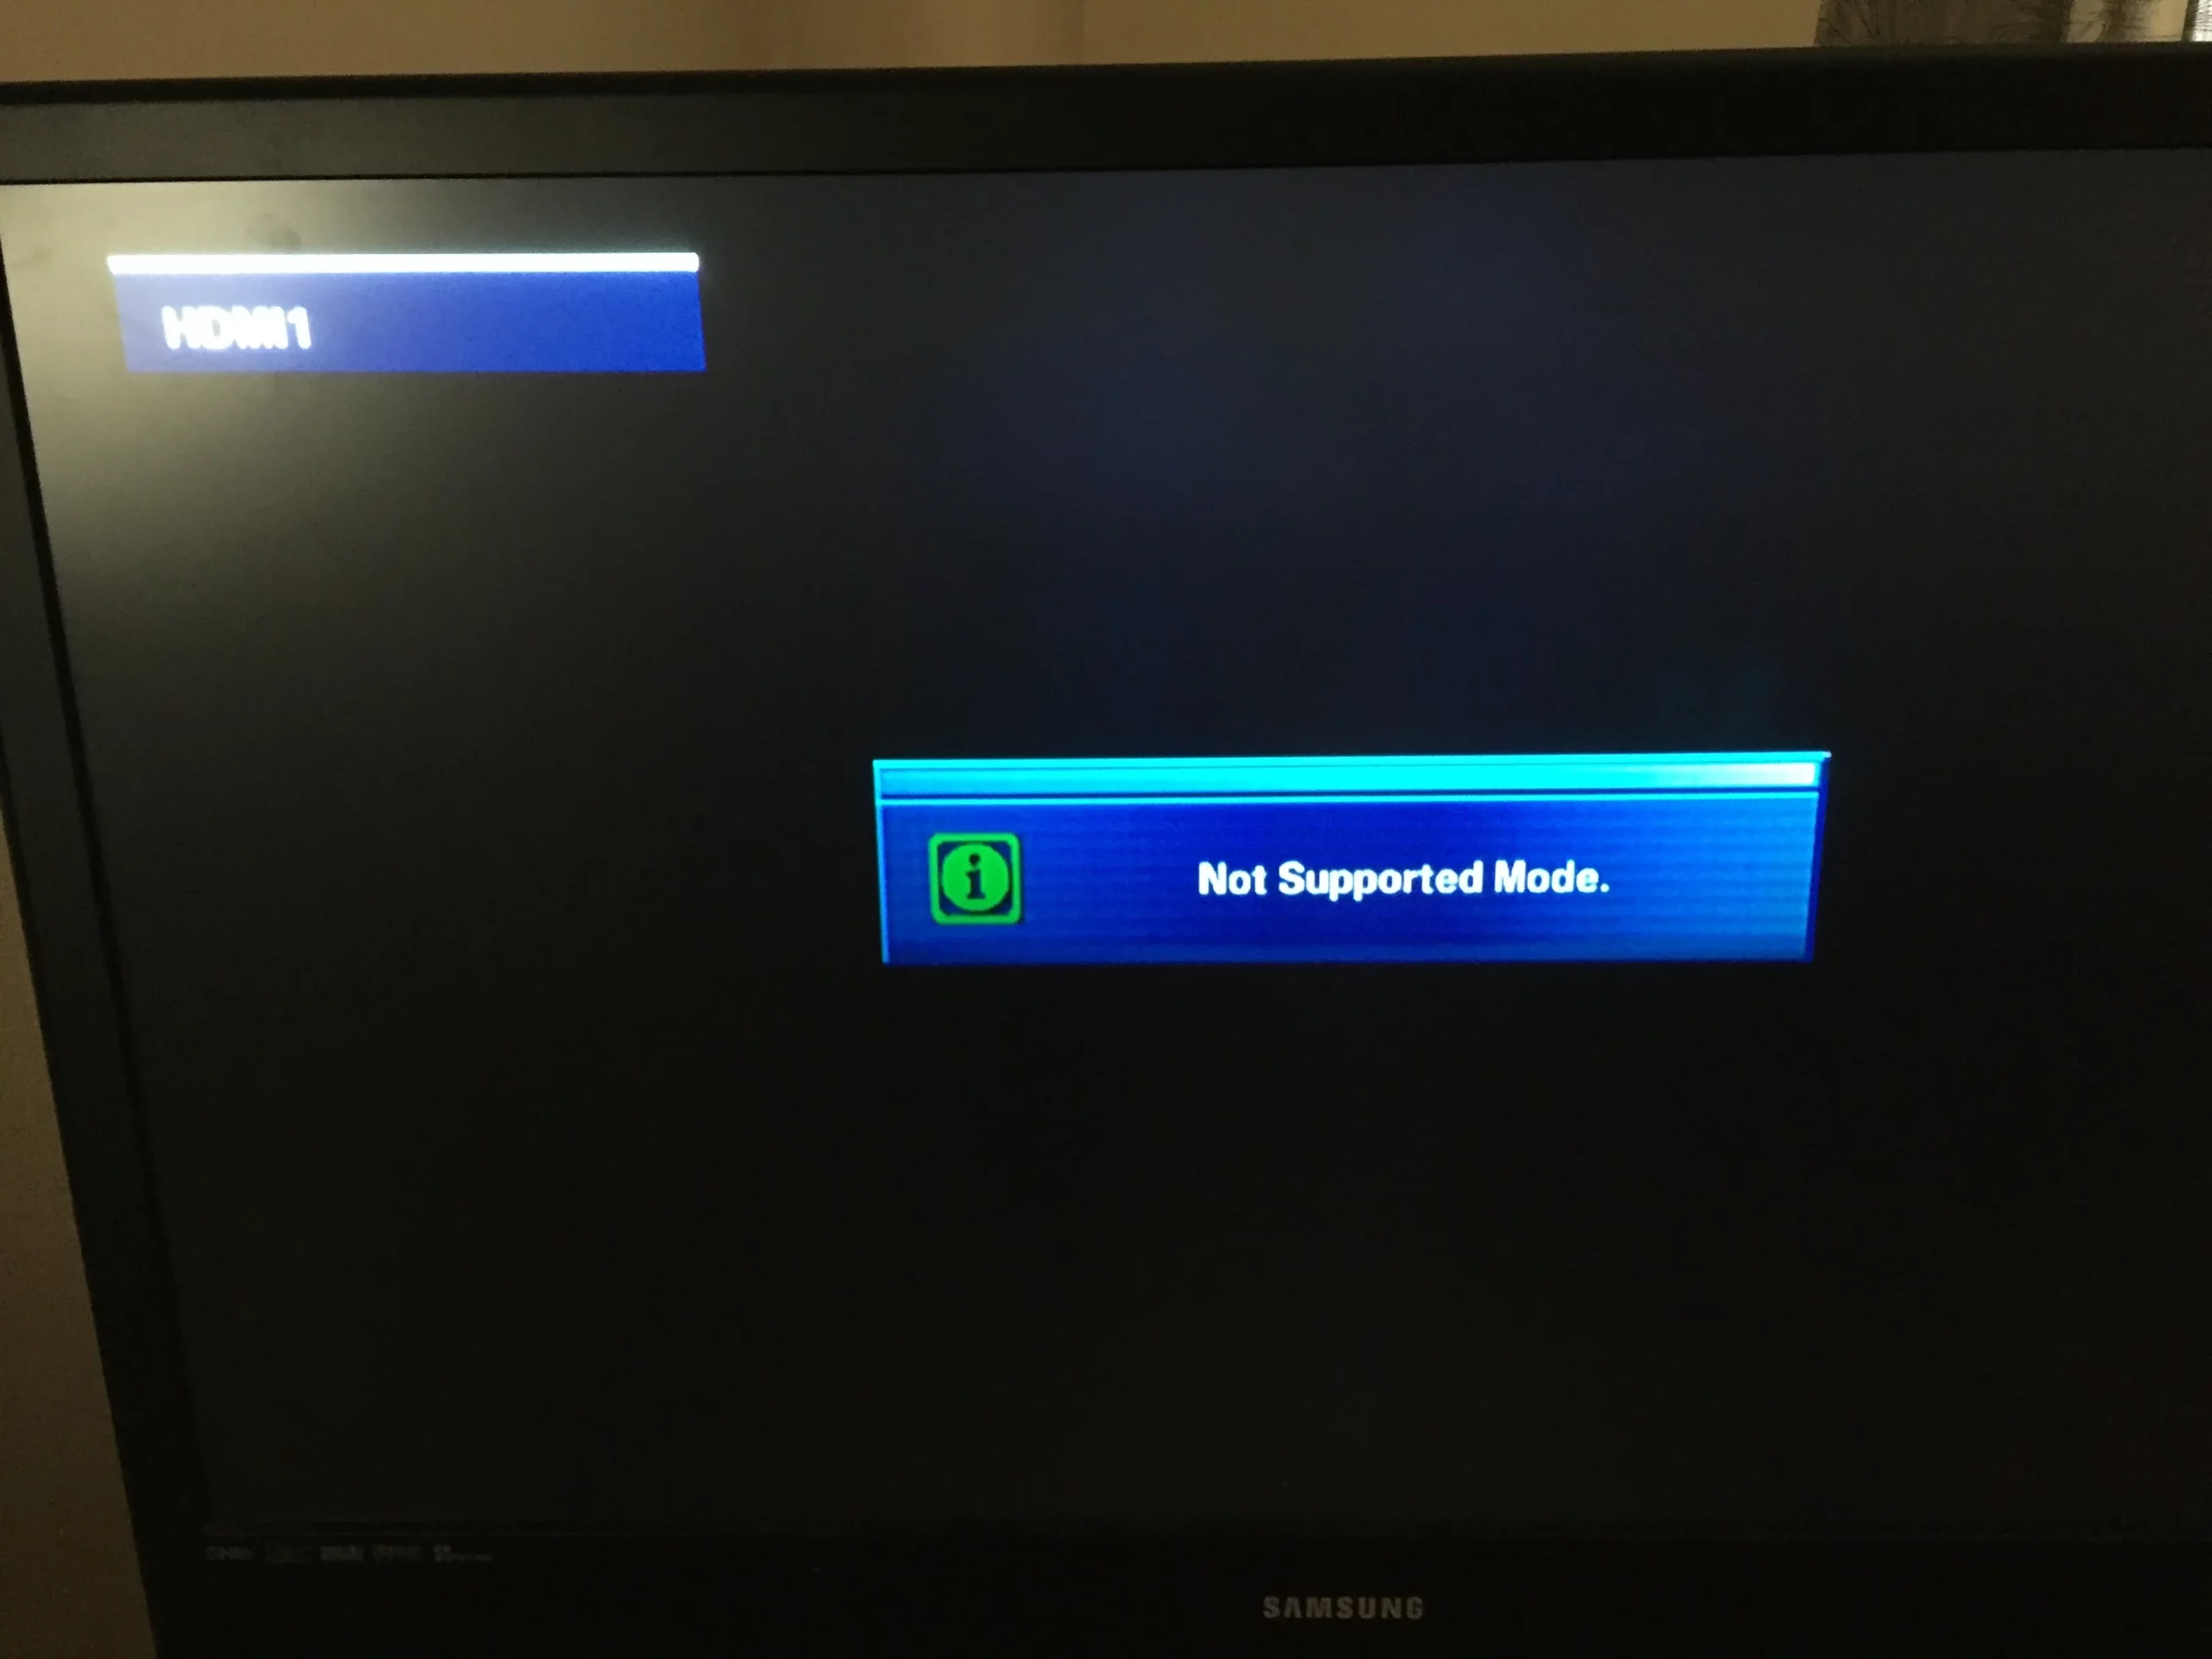 Mode Not Supported on Samsung TV